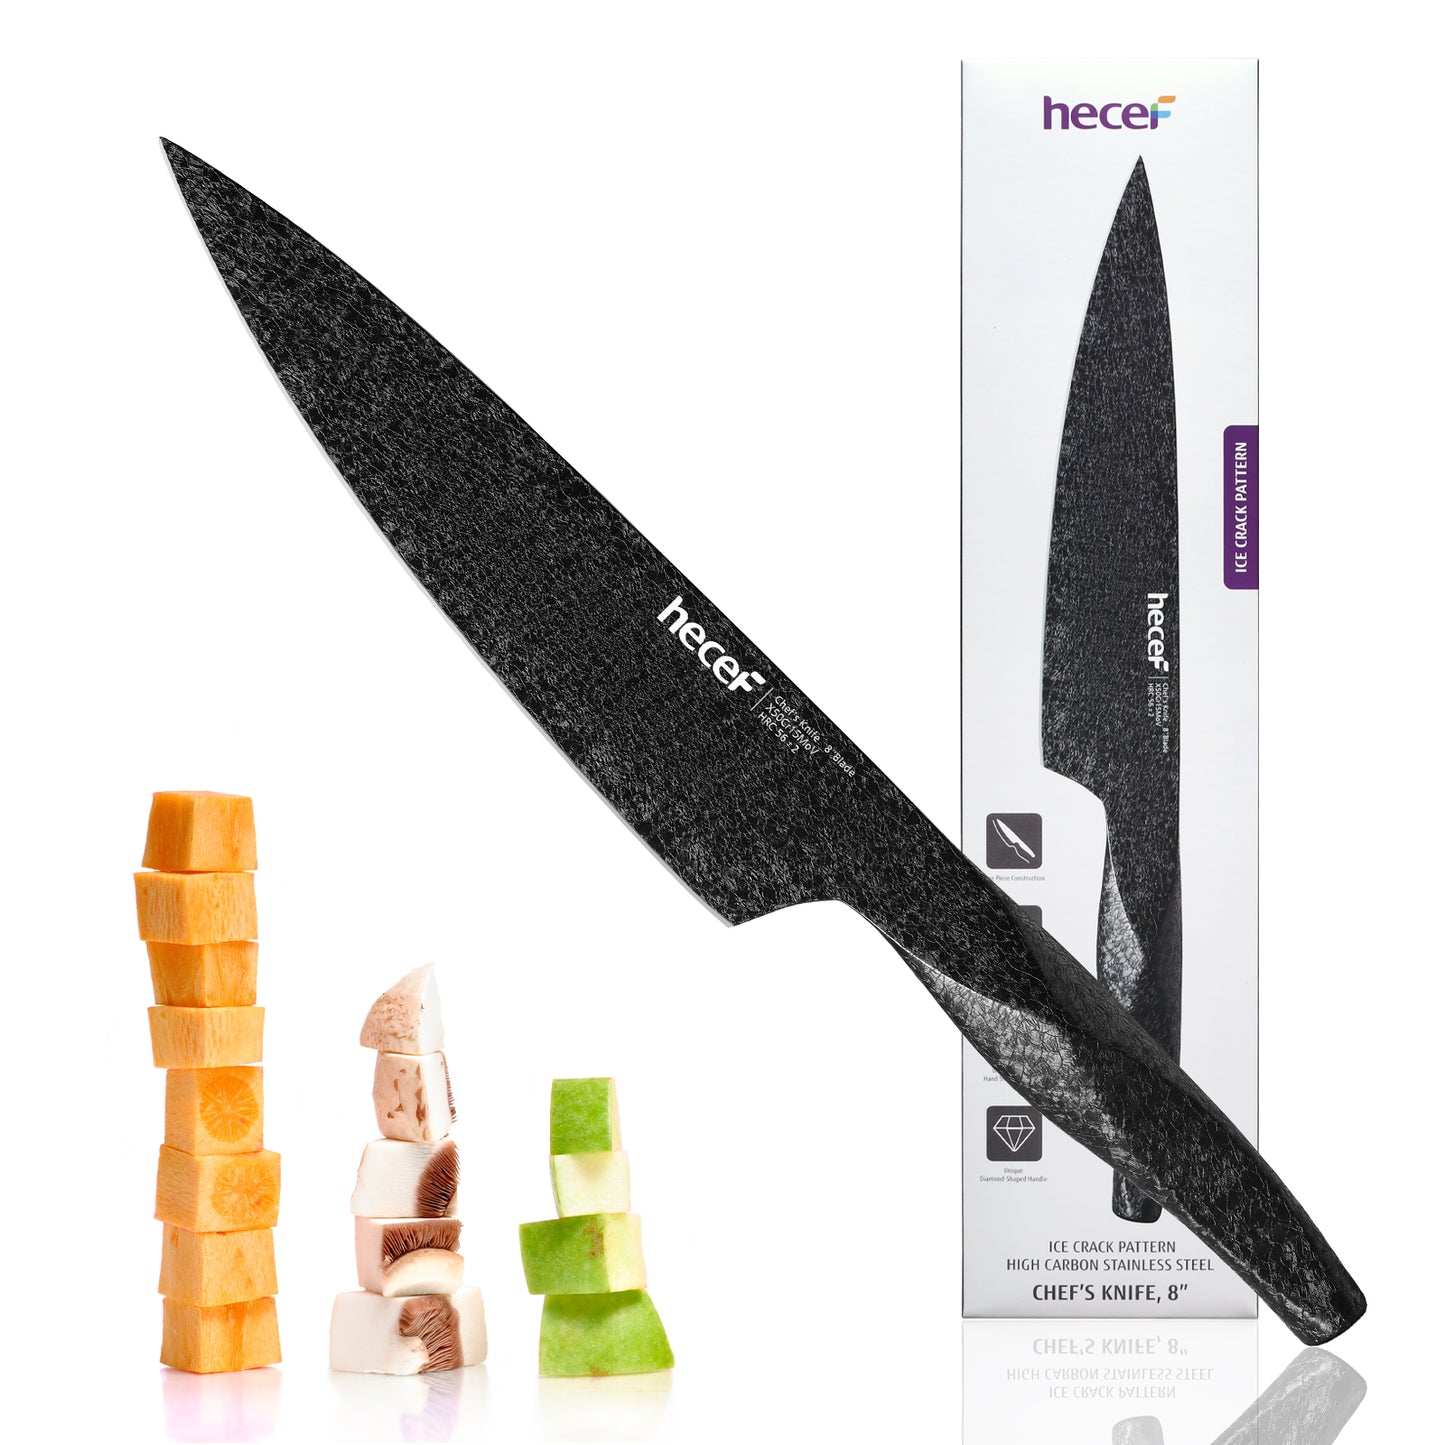 hecef 8 inch Chef Knife Ice Crack Coating Kitchen Knife Ultra Sharp Germany High Carbon Stainless Steel Professional Japanese Chef's Knife Diamond Knife with Gift Box - Hecef Kitchen